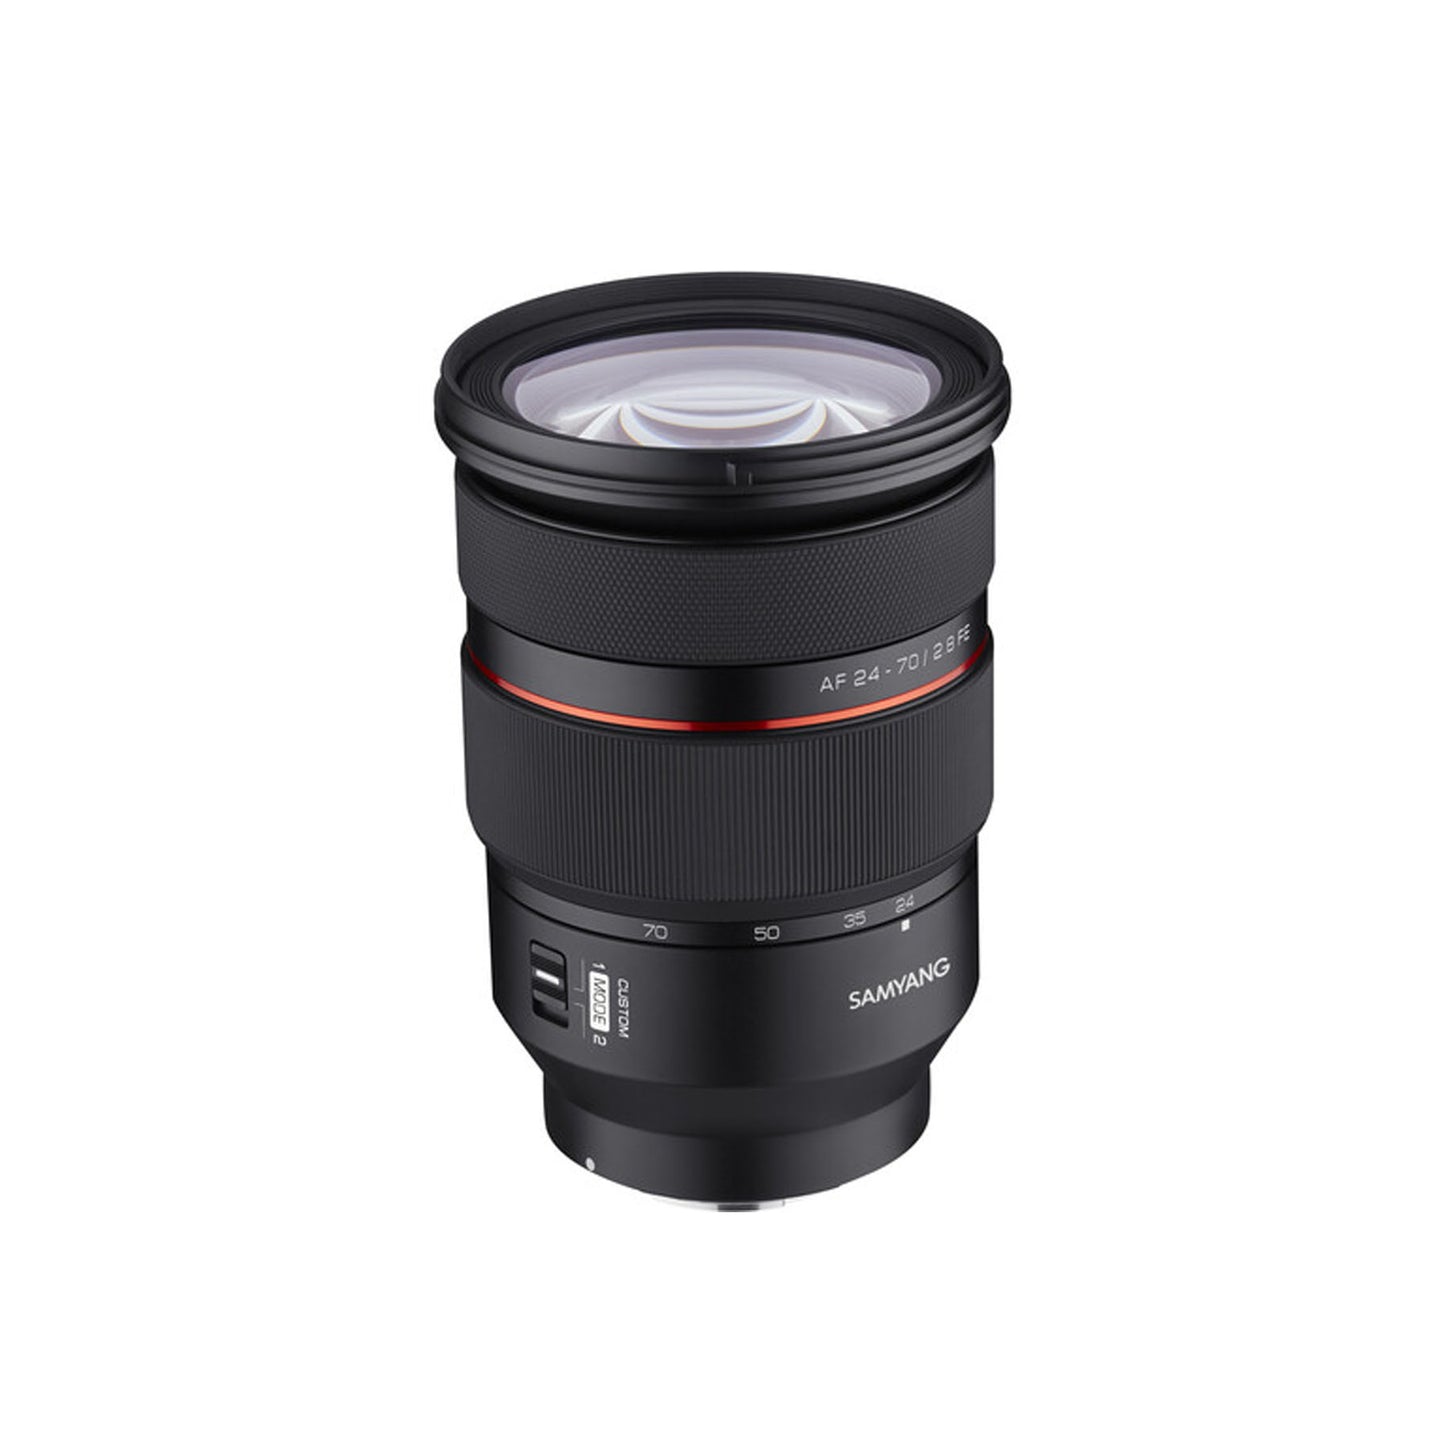 Samyang 24-70mm f/2.8 AF Wide Angle Telephoto Zoom Lens with Autofocus and Full Frame Format for Sony E Mount Cameras | SYIO2470AFZ-E